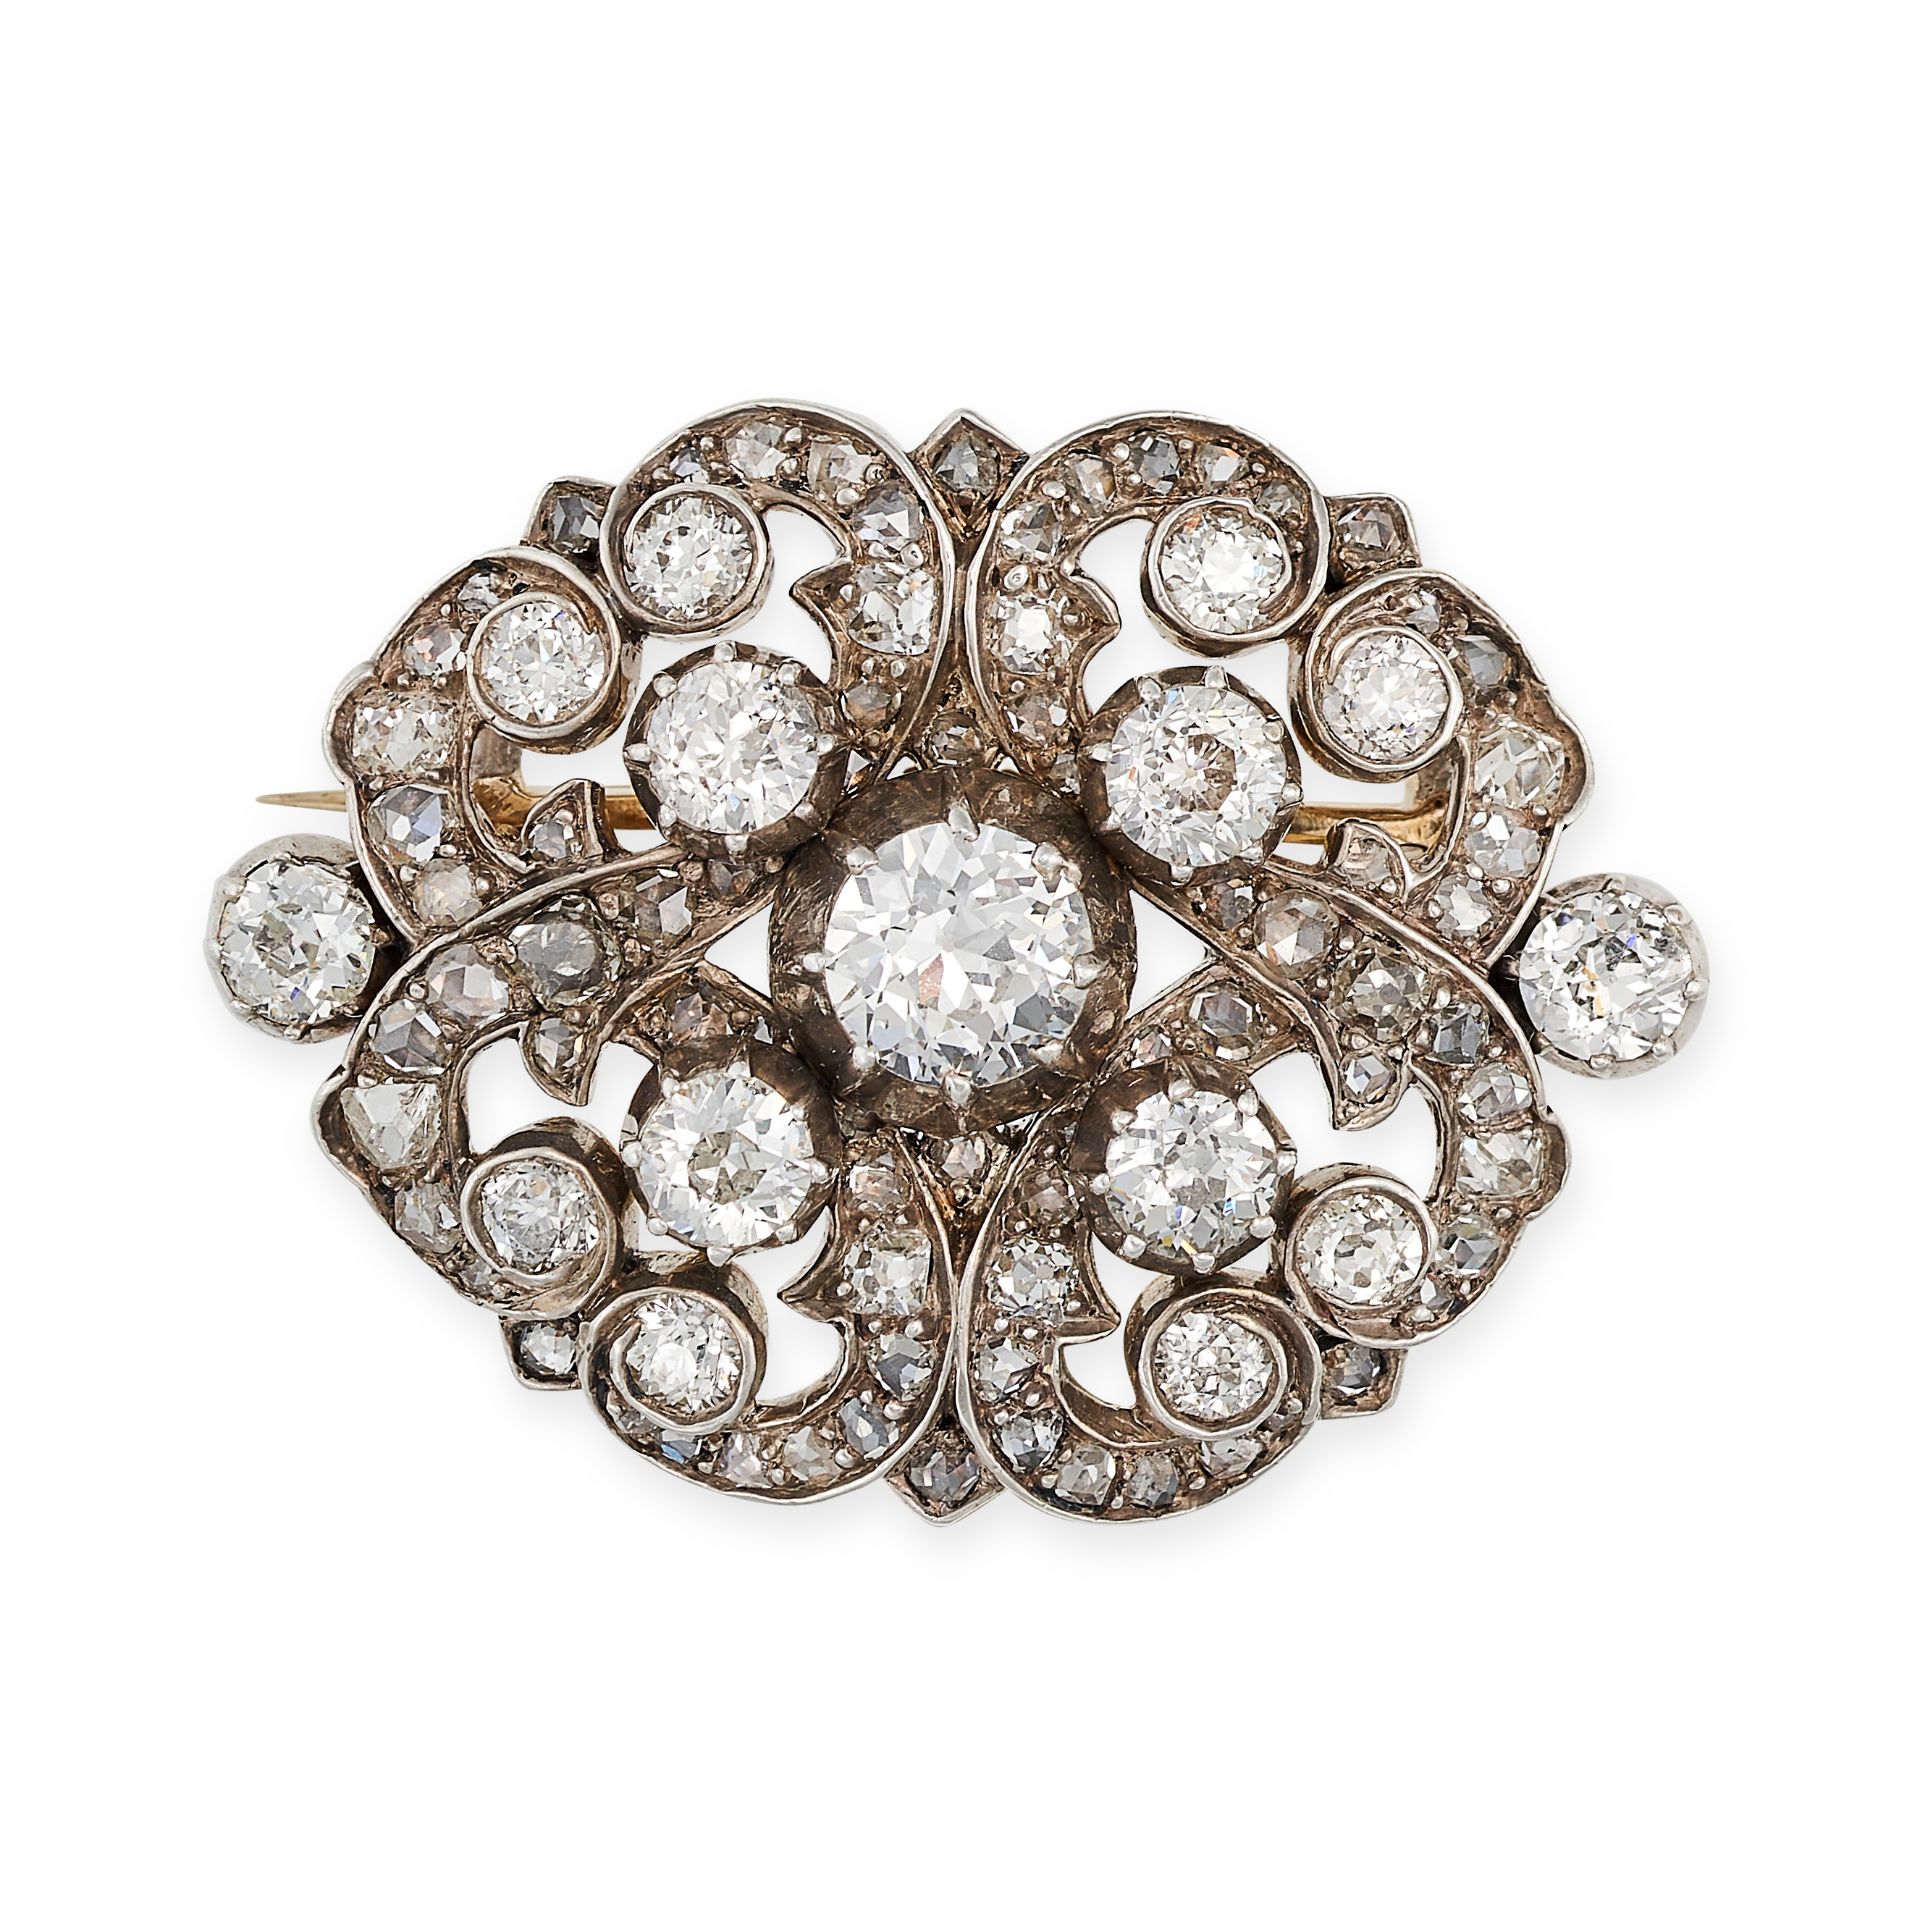 AN ANTIQUE DIAMOND BROOCH in yellow gold and silver, in scrolling form set throughout with old cu...